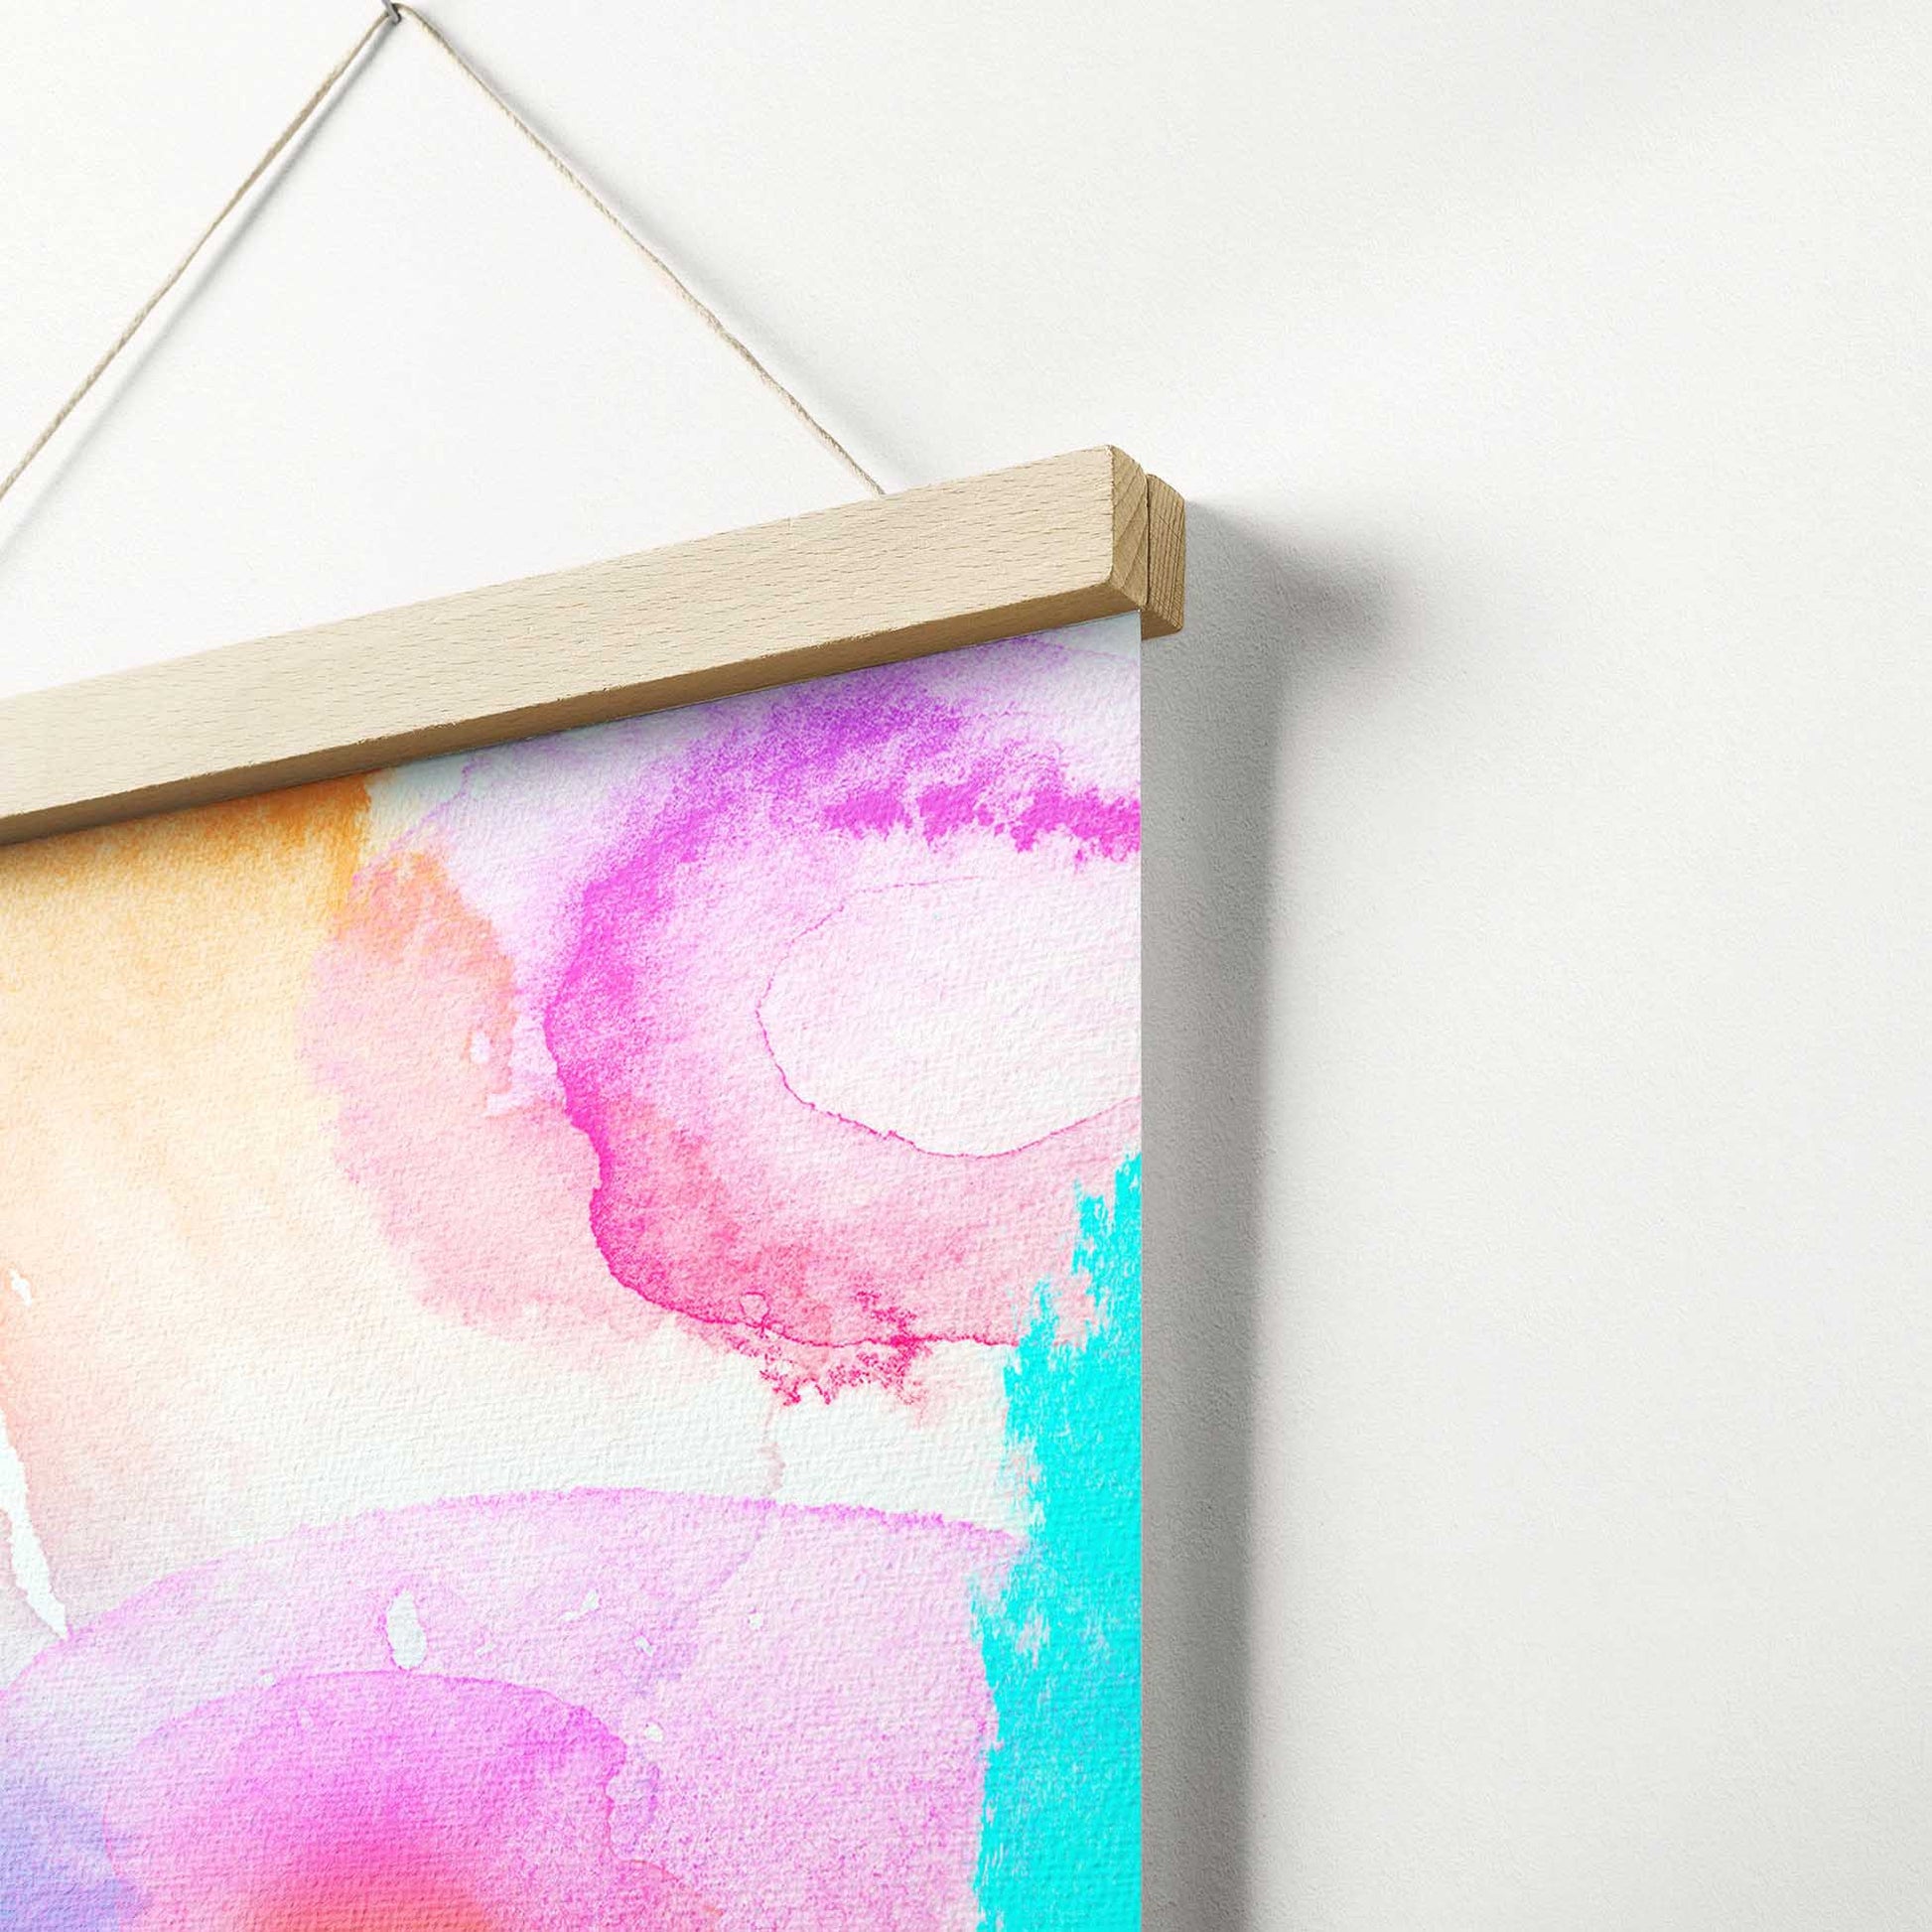 Infuse your home or office with imaginative charm using the Personalised Artistic Brush Poster Hanger. Crafted from your photo in a captivating watercolour style, this custom piece showcases vibrant colors 